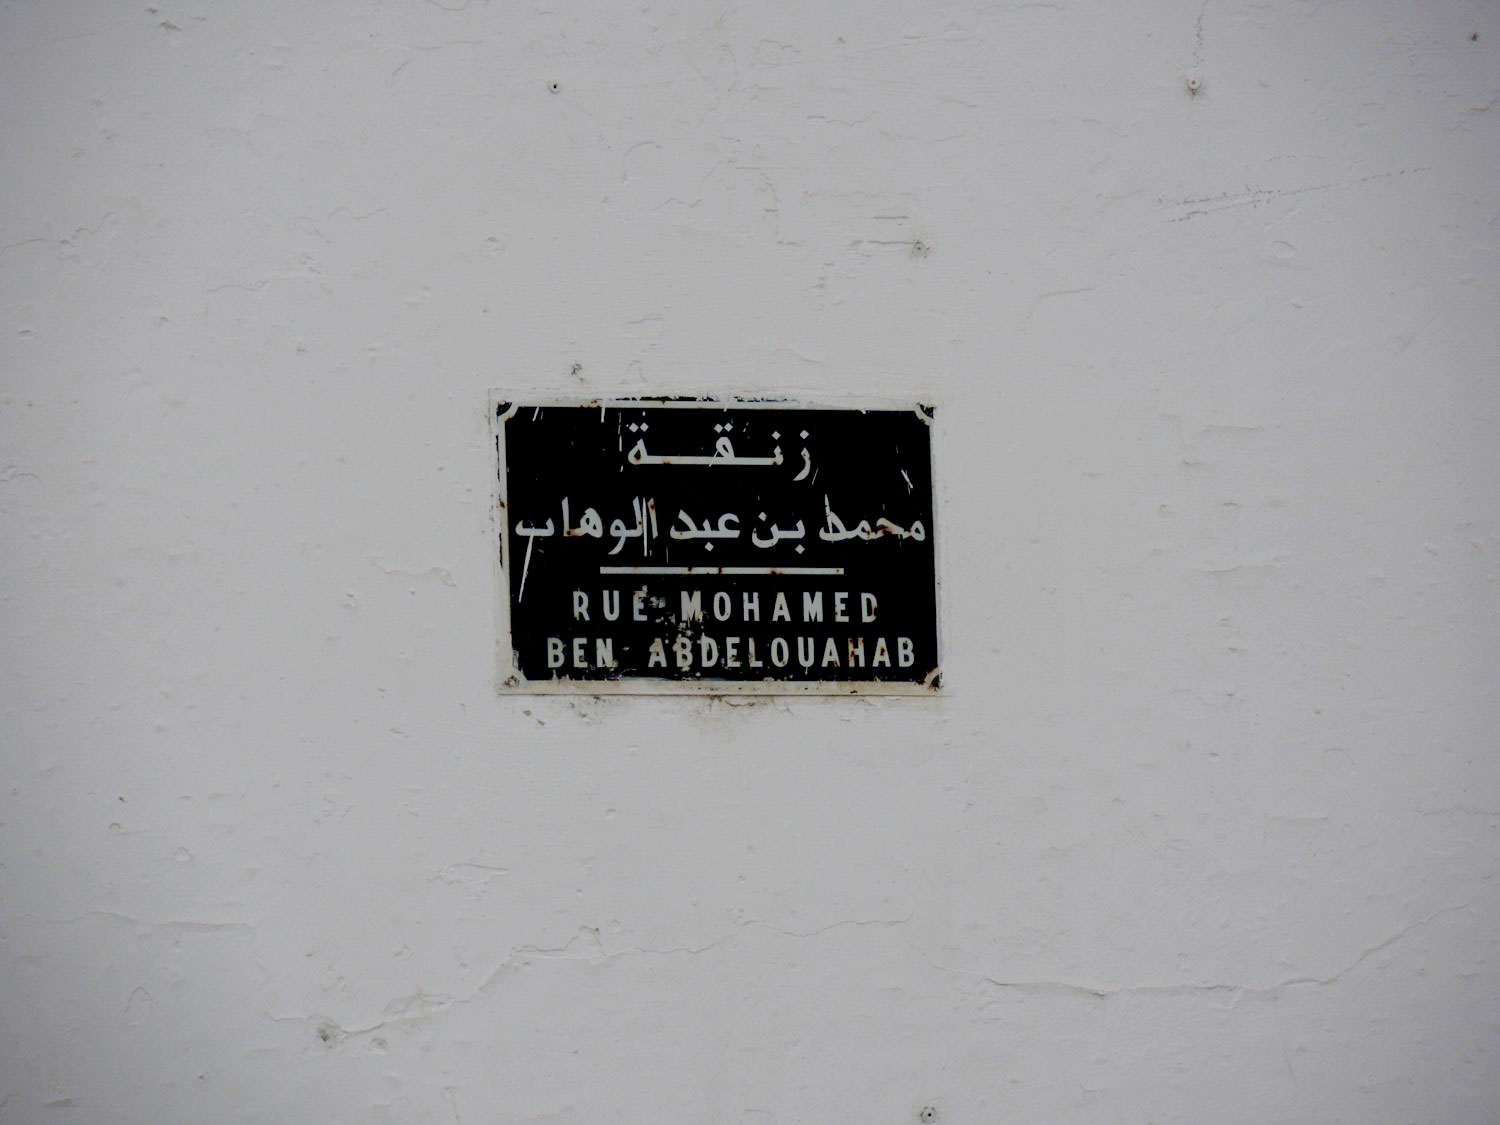 <p>View of the street sign for Rue Mohamed Ben Abdelouahab</p><p><br></p>